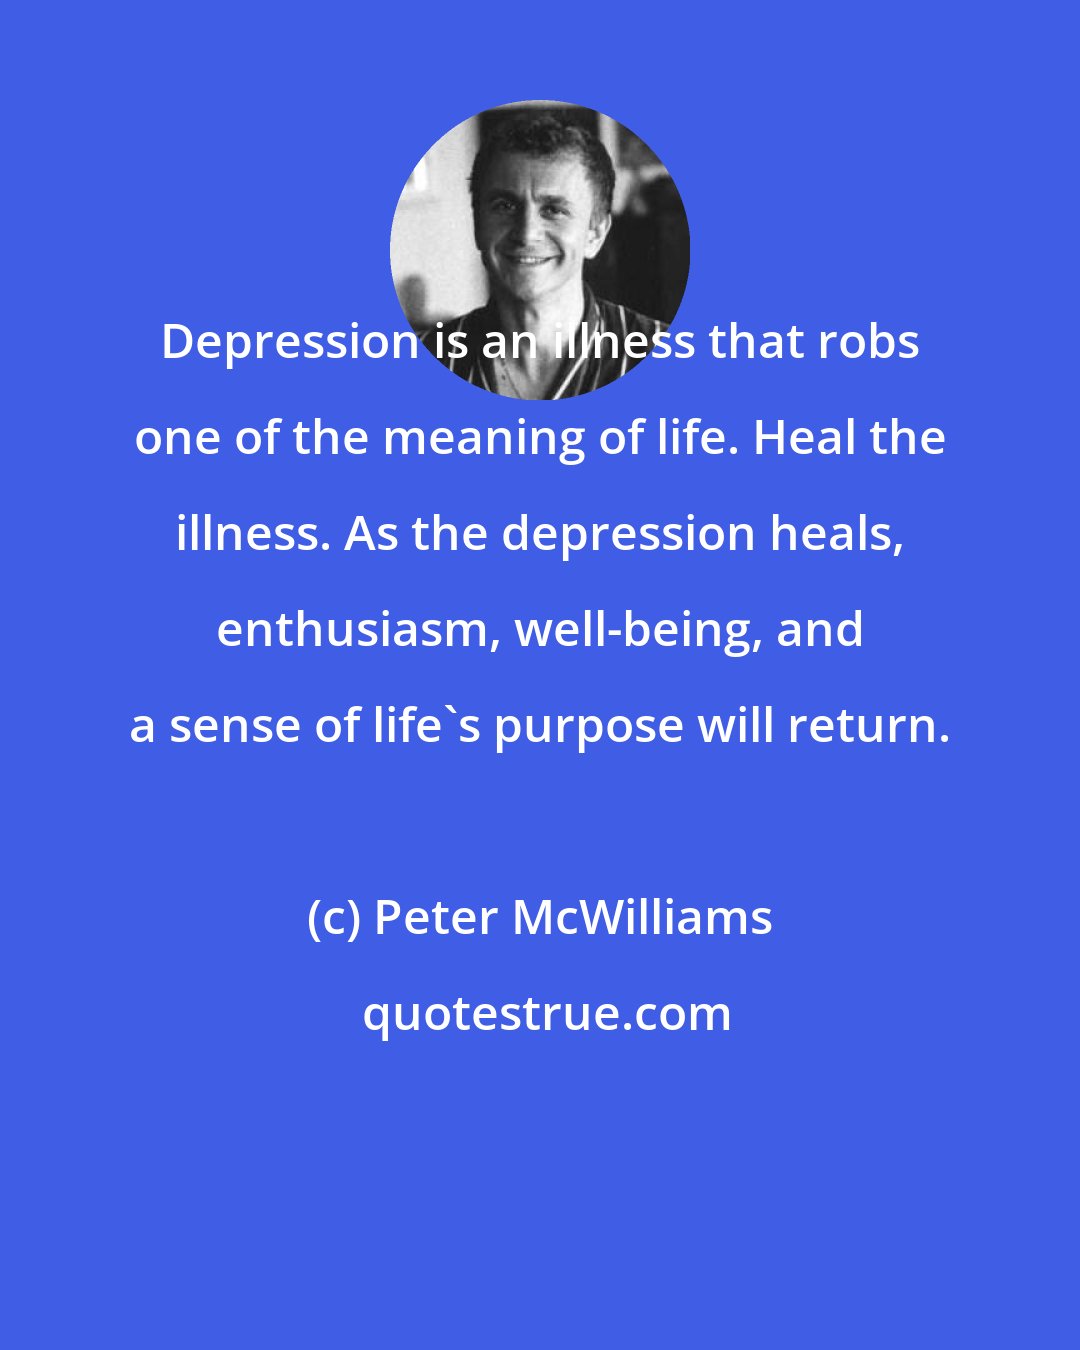 Peter McWilliams: Depression is an illness that robs one of the meaning of life. Heal the illness. As the depression heals, enthusiasm, well-being, and a sense of life's purpose will return.